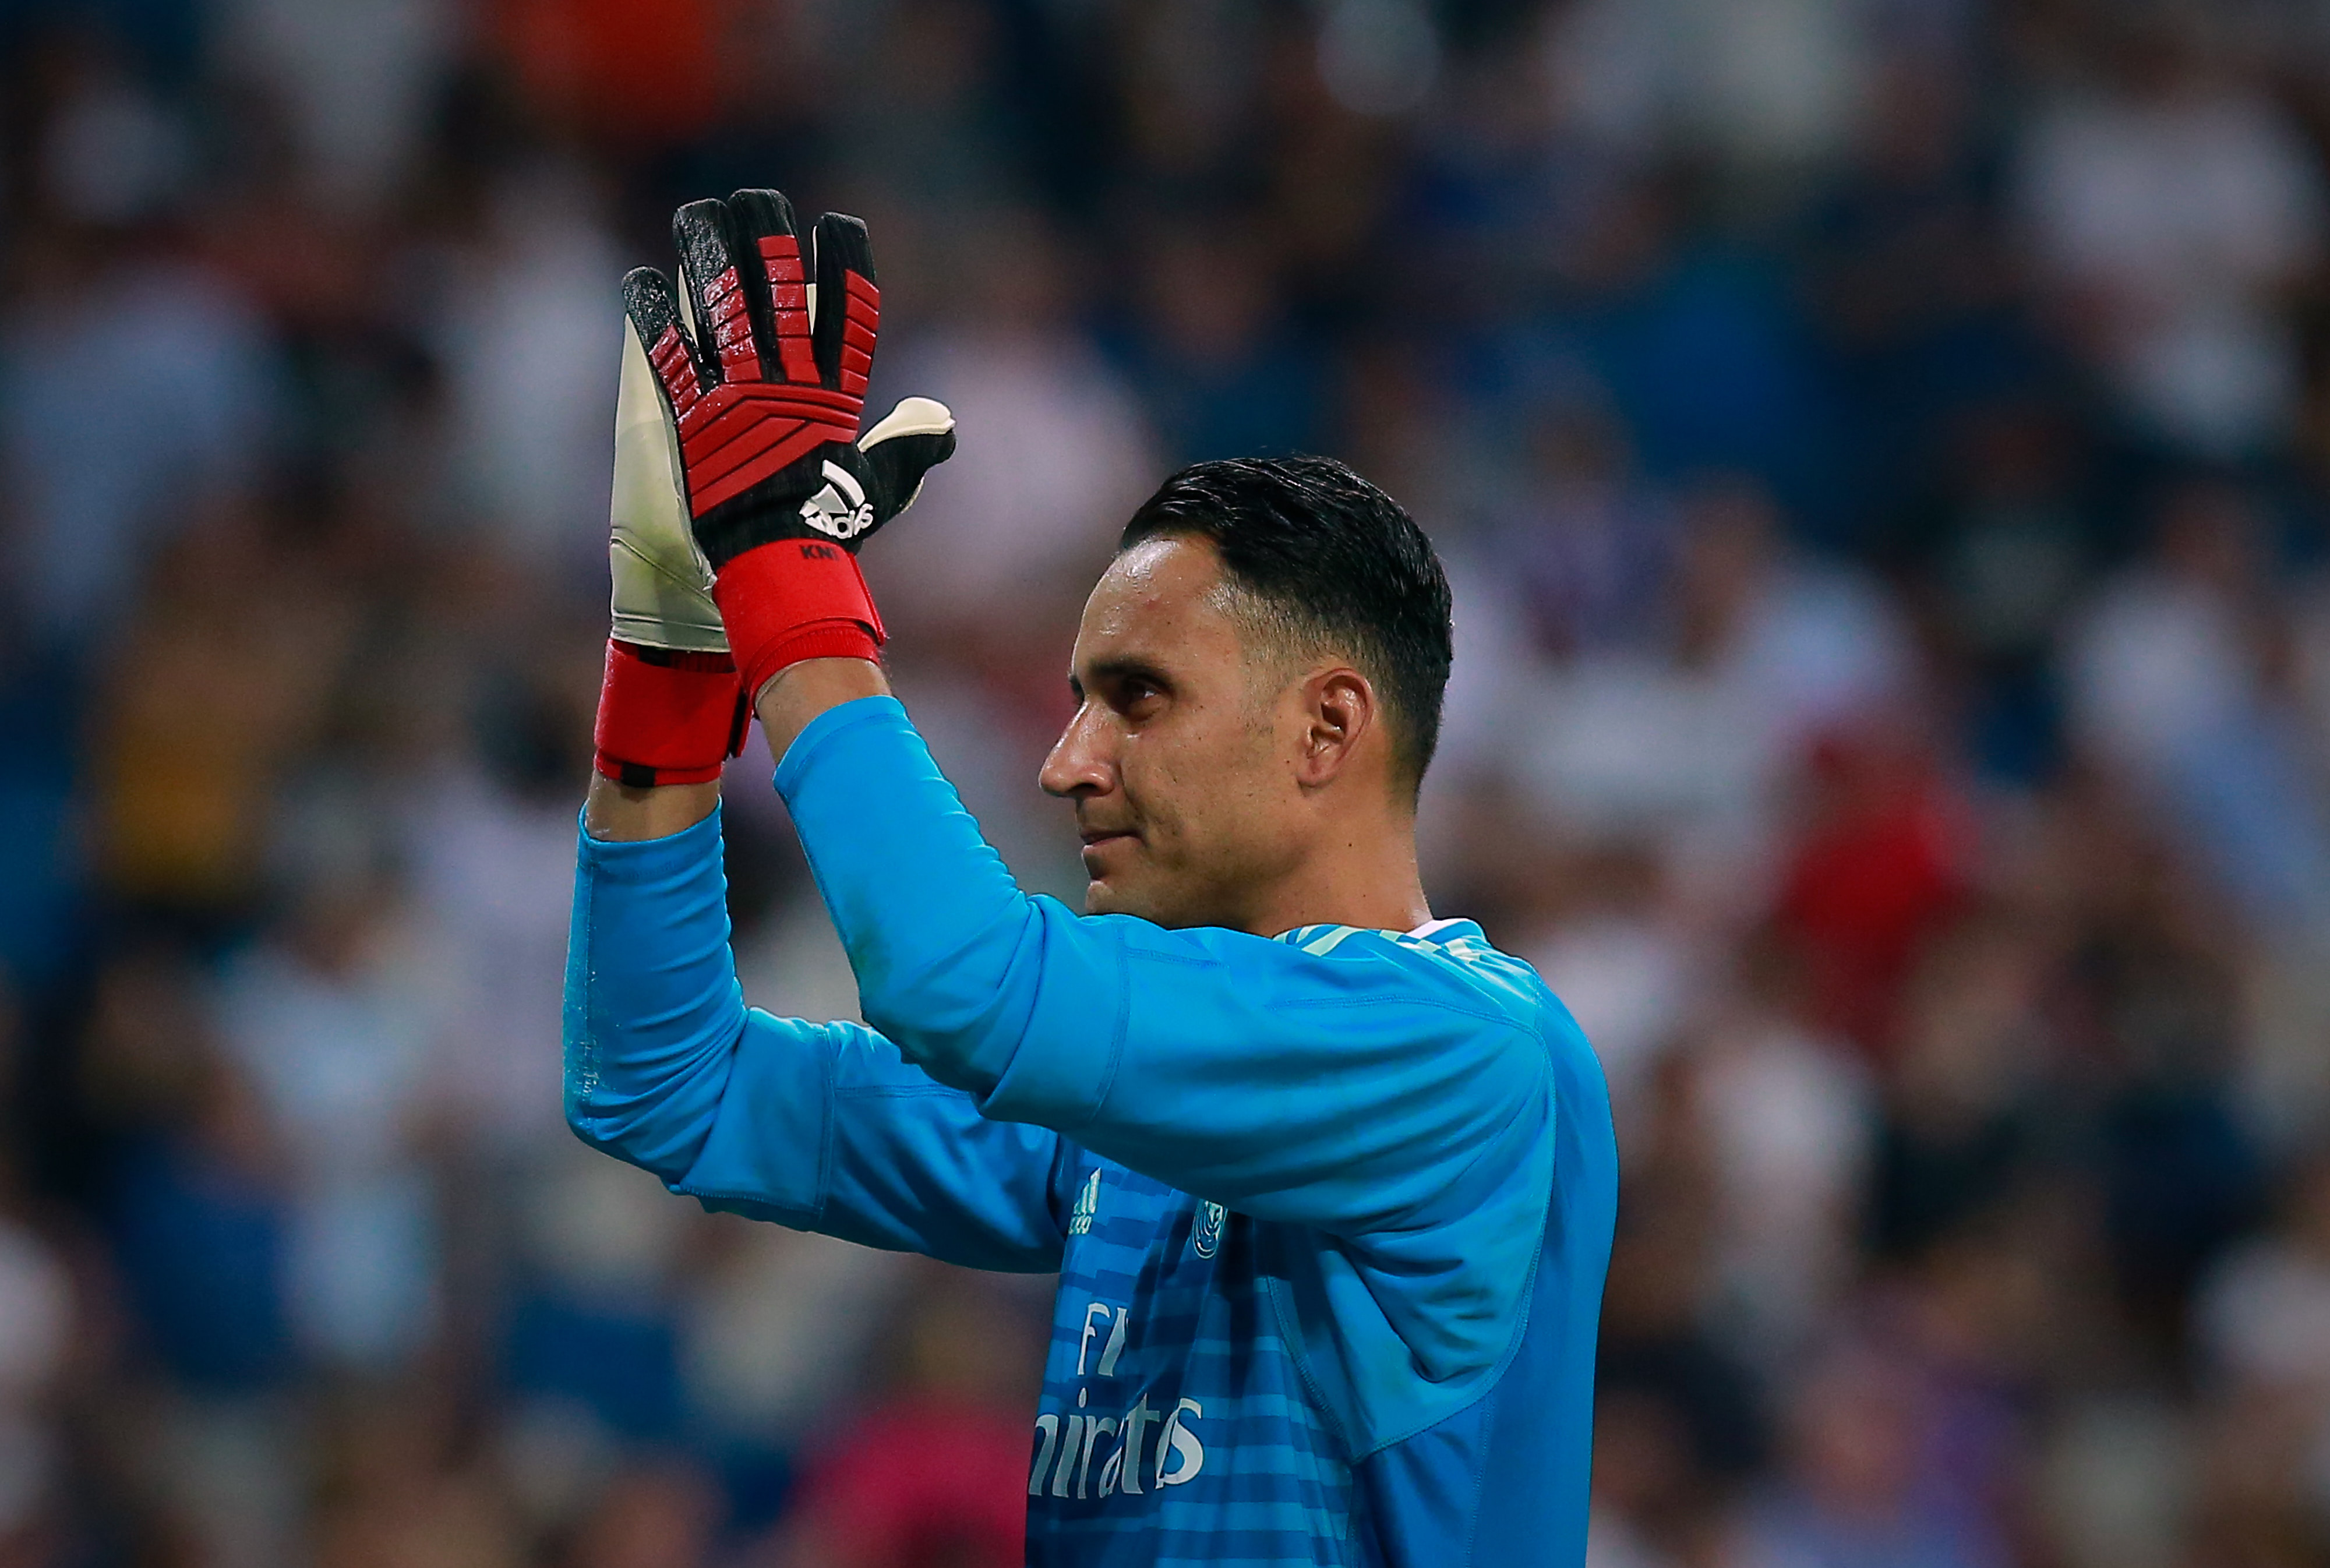 MADRID, SPAIN - AUGUST 11: Goalkeeper Keylor Navas of Real Madrid CF reacts during the Santiago Bernabeu Trophy between Real Madrid CF and AC Milan at Estadio Santiago Bernabeu on August 11, 2018 in Madrid, Spain. (Photo by Gonzalo Arroyo Moreno/Getty Images)